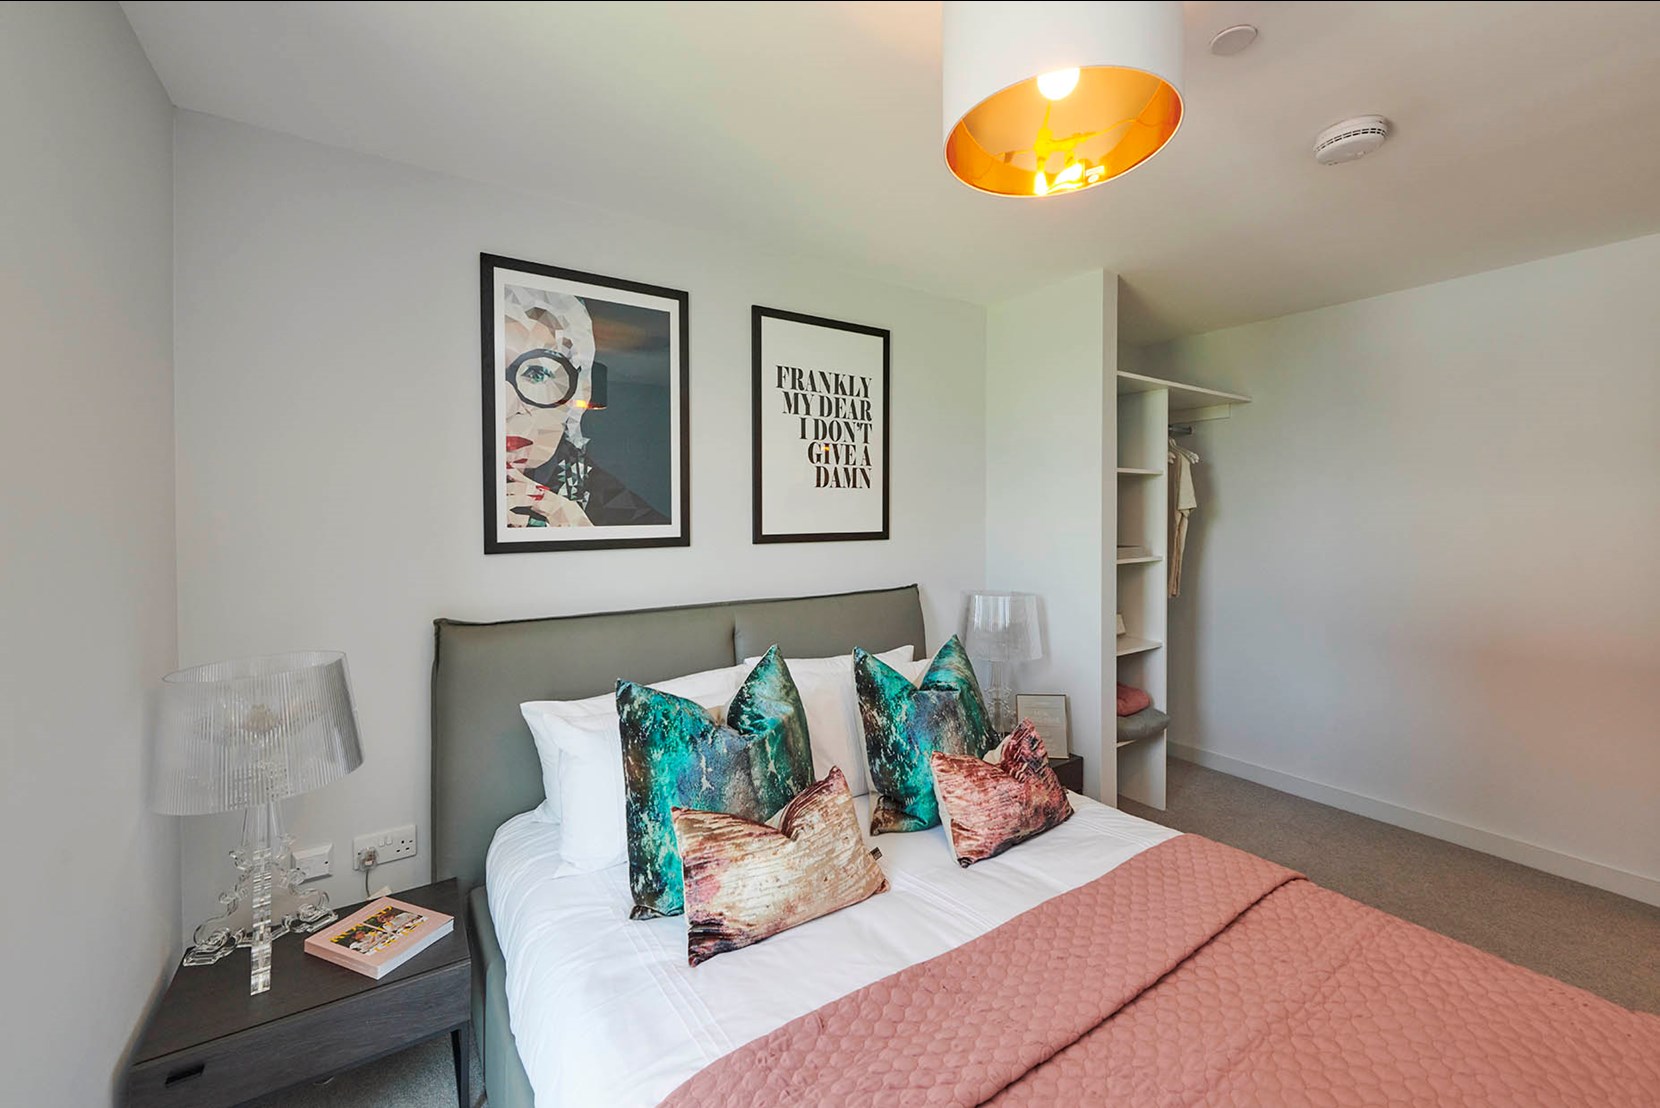 Apartments to Rent by JLL at Duet, Salford, M50, bedroom